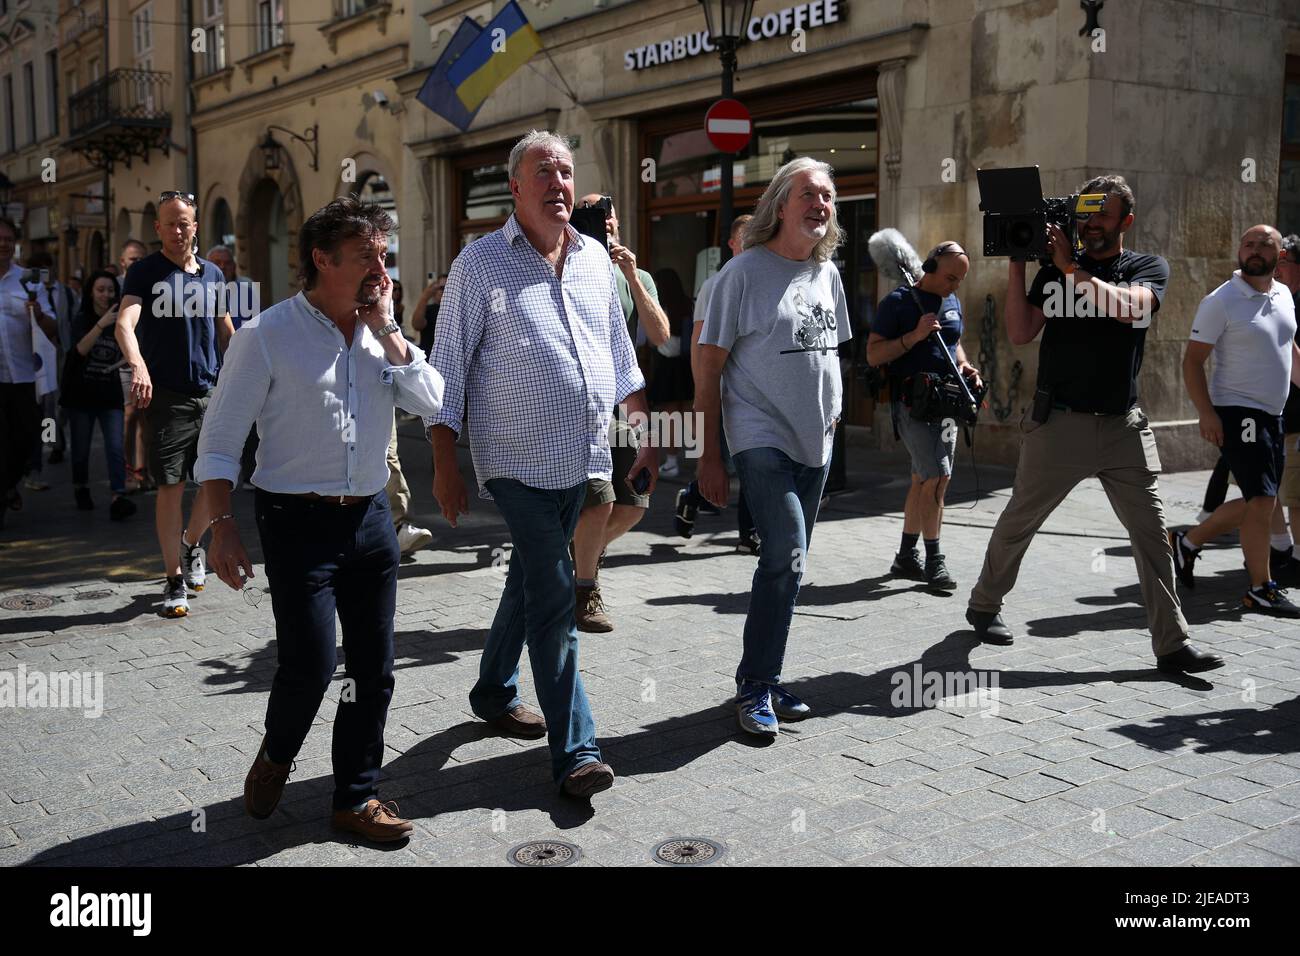 The Grand Tour stars, Jeremy Clarkson, Richard Hammond and James May, walk along the Main Square in Cracow, Poland, while on tour filming the show. The Grand Tour is a British motoring television series, created by Jeremy Clarkson, Richard Hammond, James May, and Andy Wilman, made for Amazon exclusively for its online streaming service Amazon Prime Video which premiered in 2016. The programme was conceived in the wake of the departure of Clarkson, Hammond, May and Wilman from the BBC series Top Gear. (Photo by Vito Corleone/SOPA Images/Sipa USA) Stock Photo